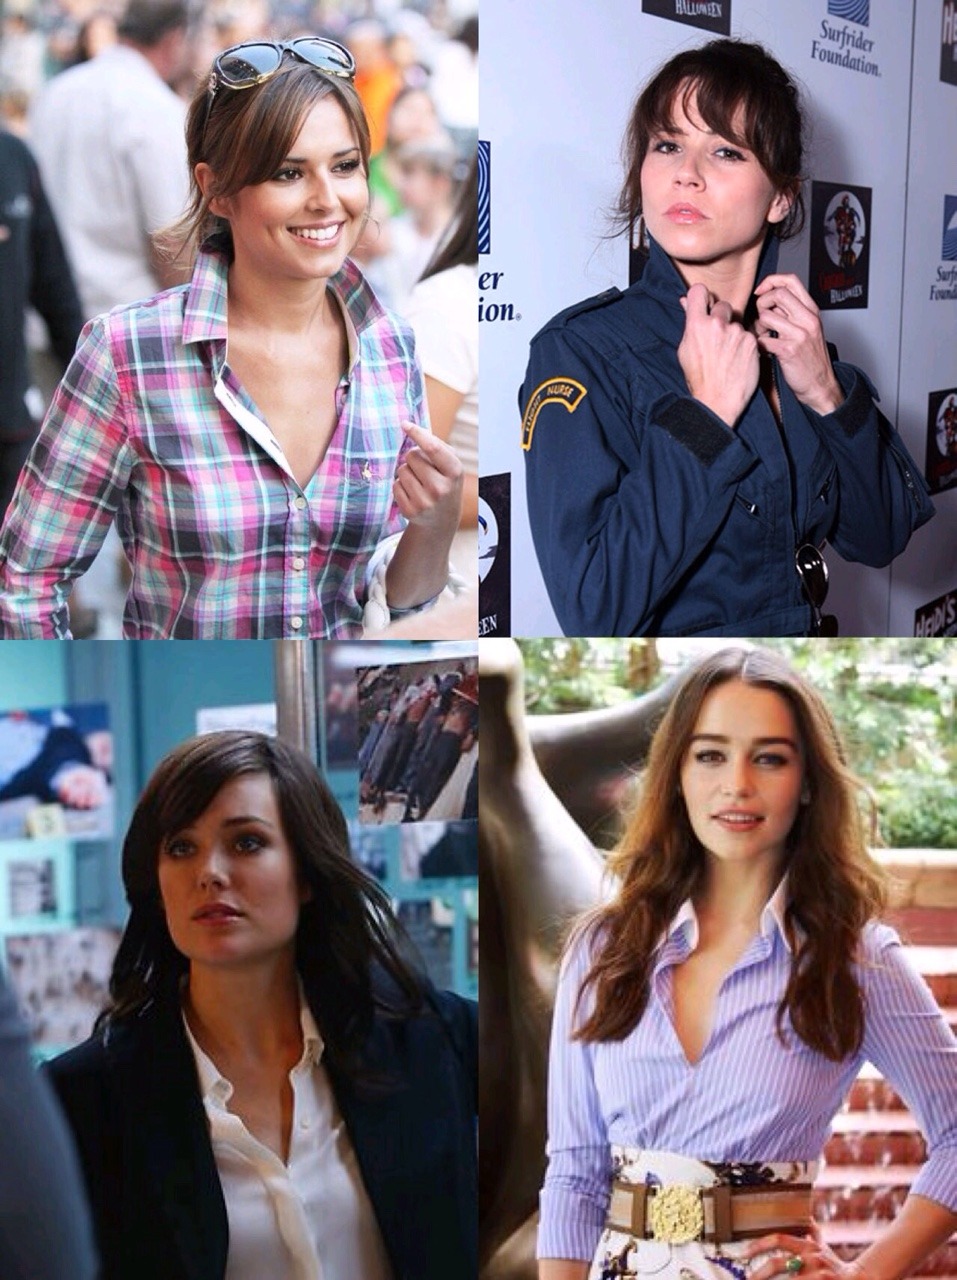 Part 2. More ladies looking fine: shirts and collars.Part 1 here: http://yeah-thistle-do-nicely.tumblr.com/post/113705112004/ladies-looking-fine-shirts-and-collars